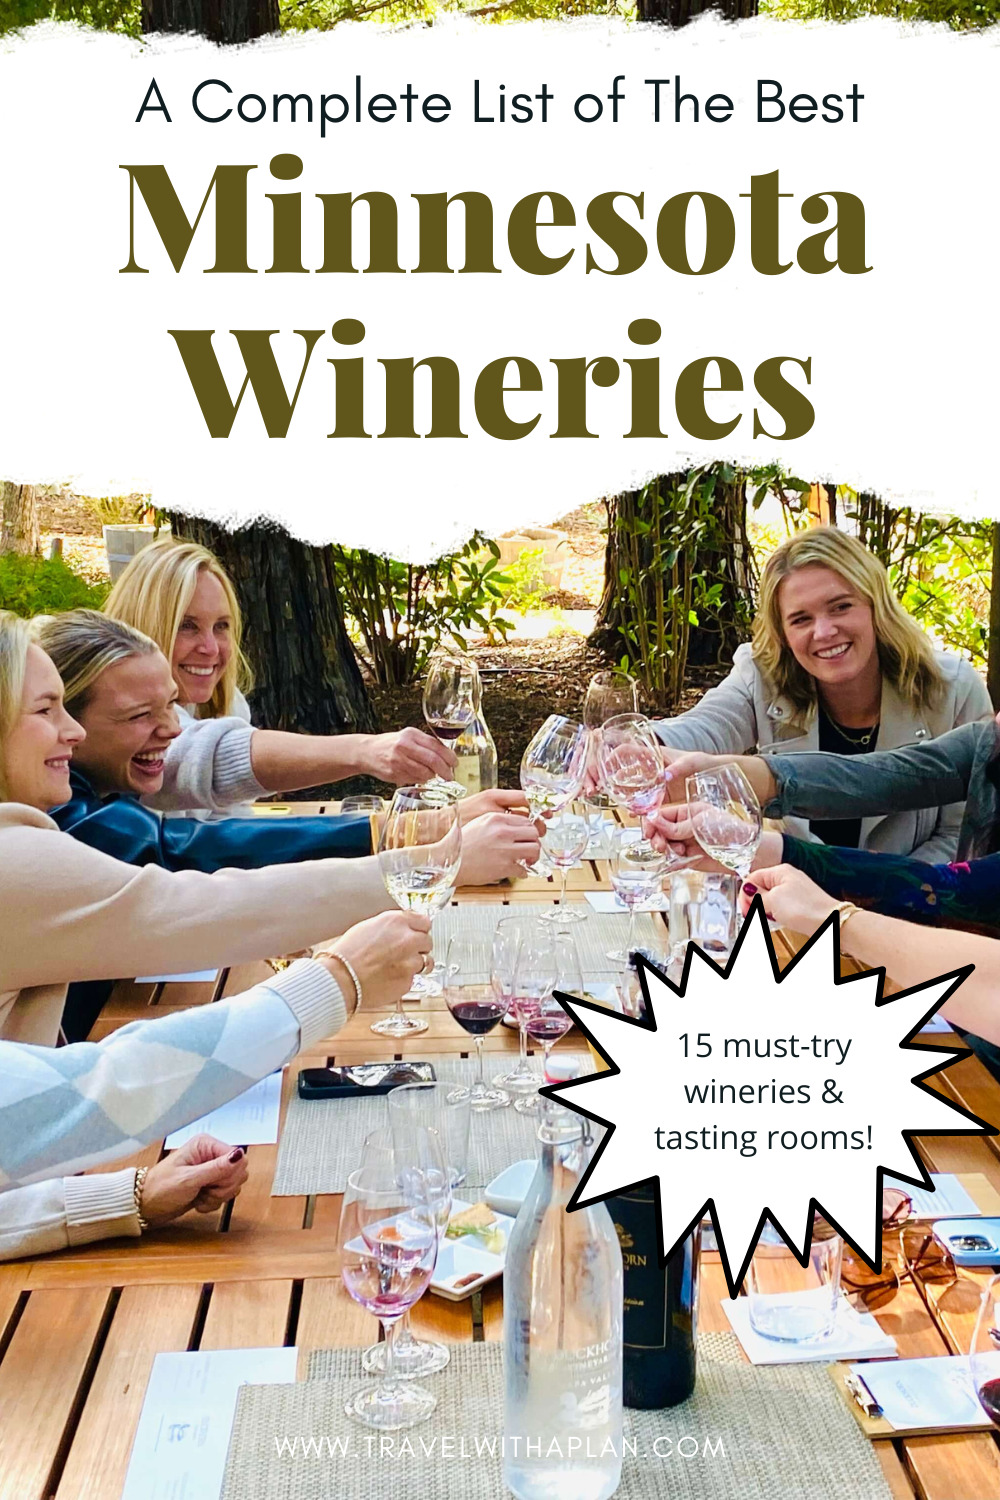 As Minnesota natives, we've compiled a list of the best Minnesota wineries that you need to try!  Here are the 15 Minnesota wineries that make our list!